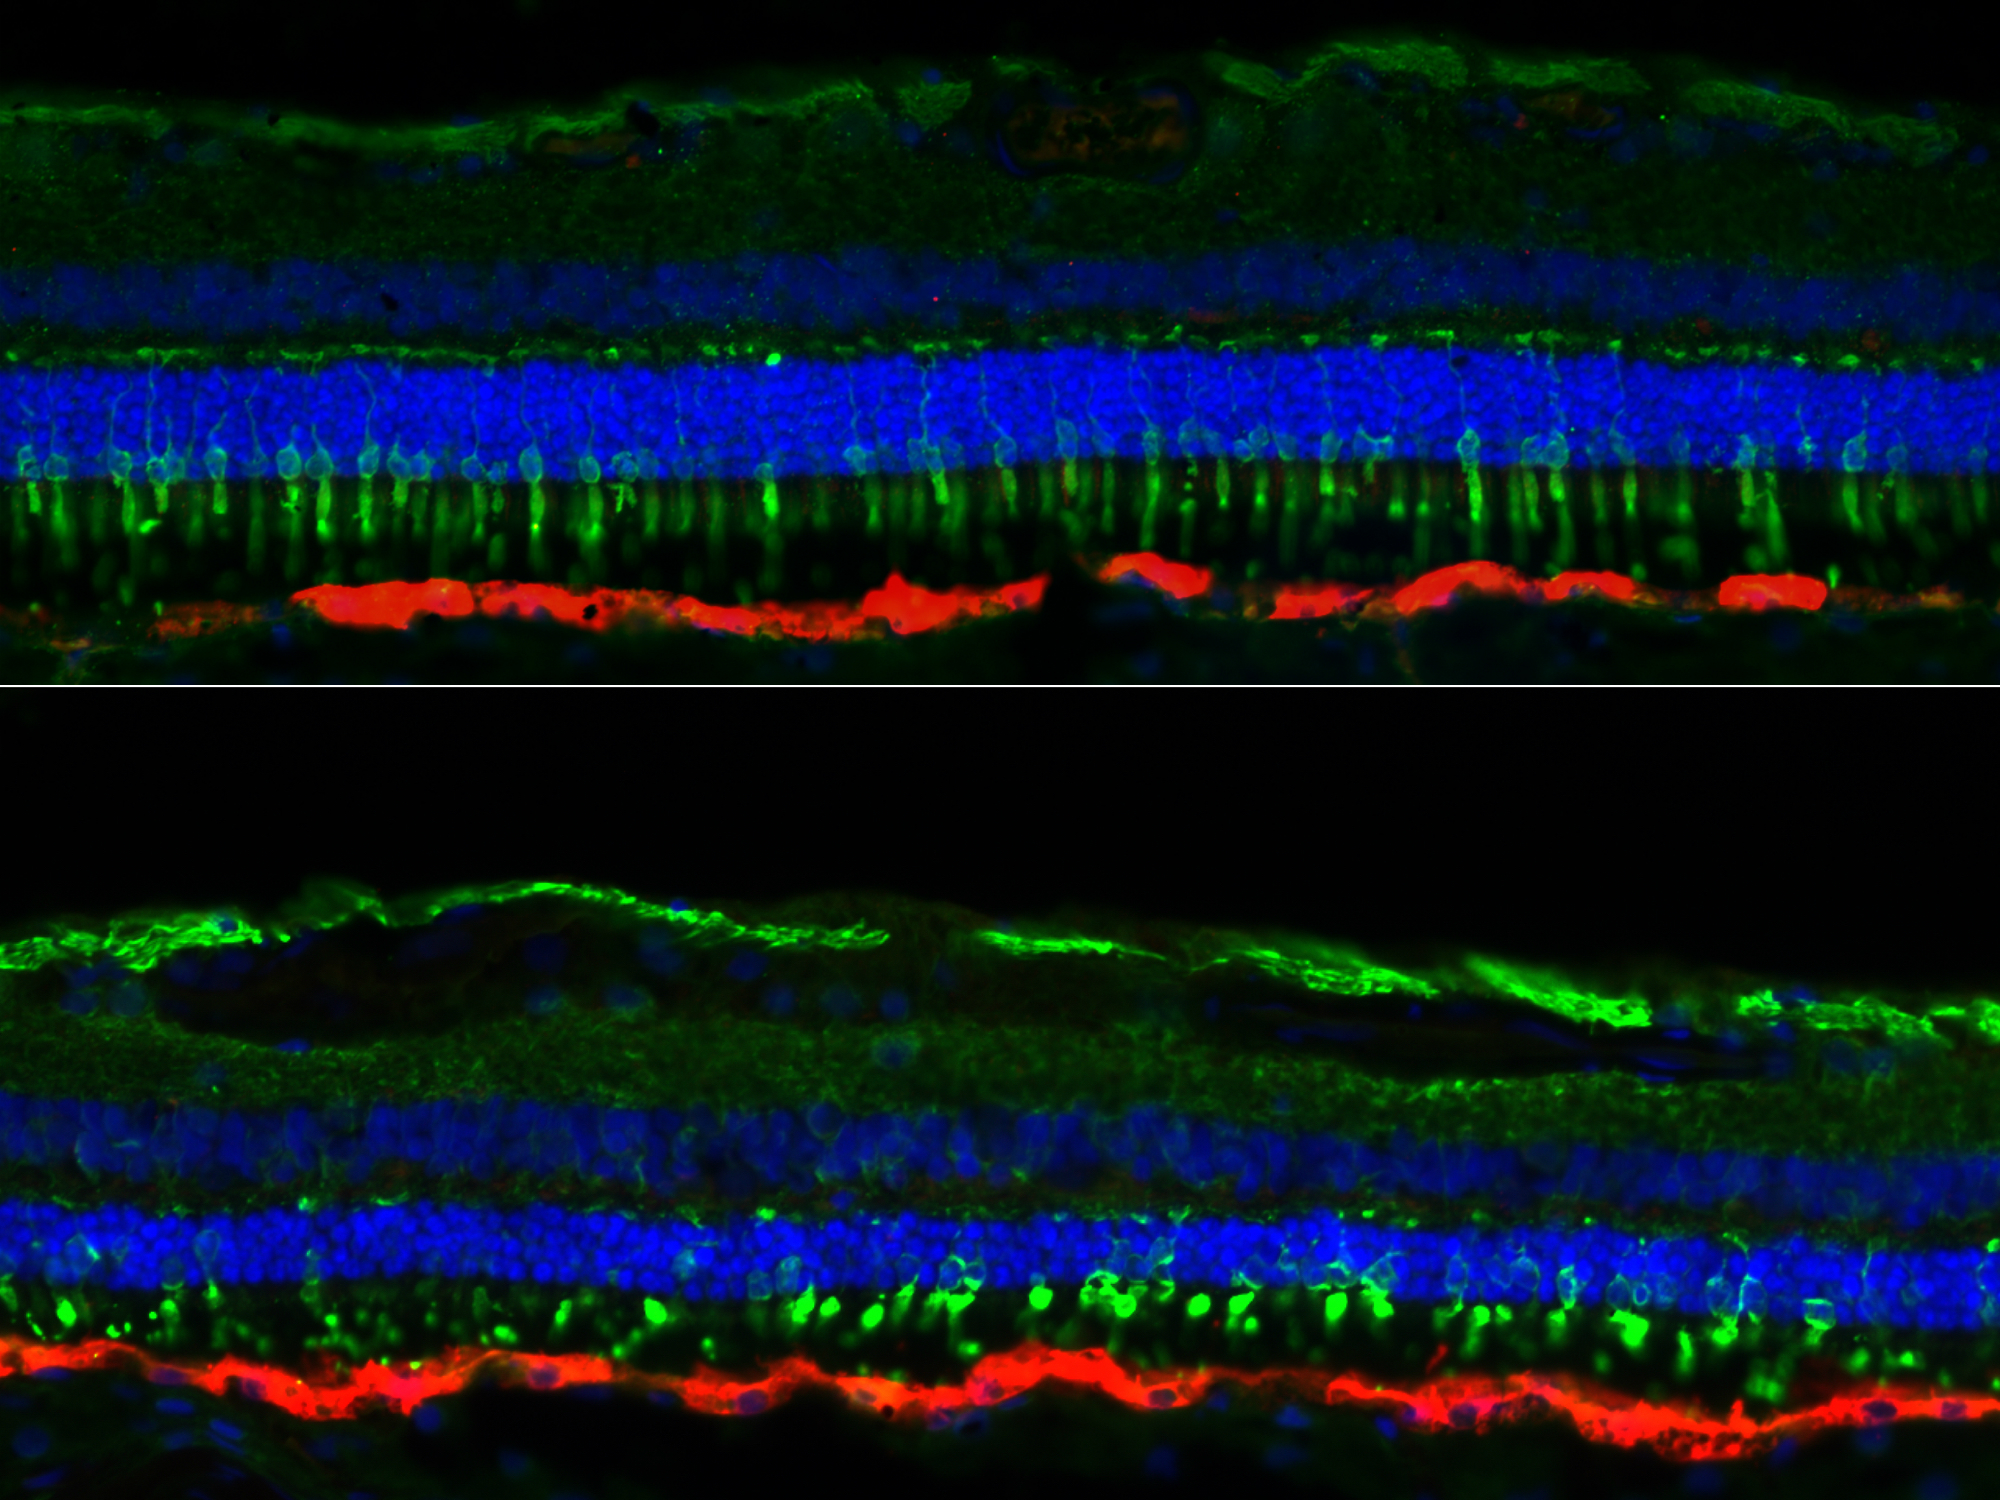 Top-and-bottom show fluorescent, microscopic images of layers of the eye's retina in blue, green, and red.